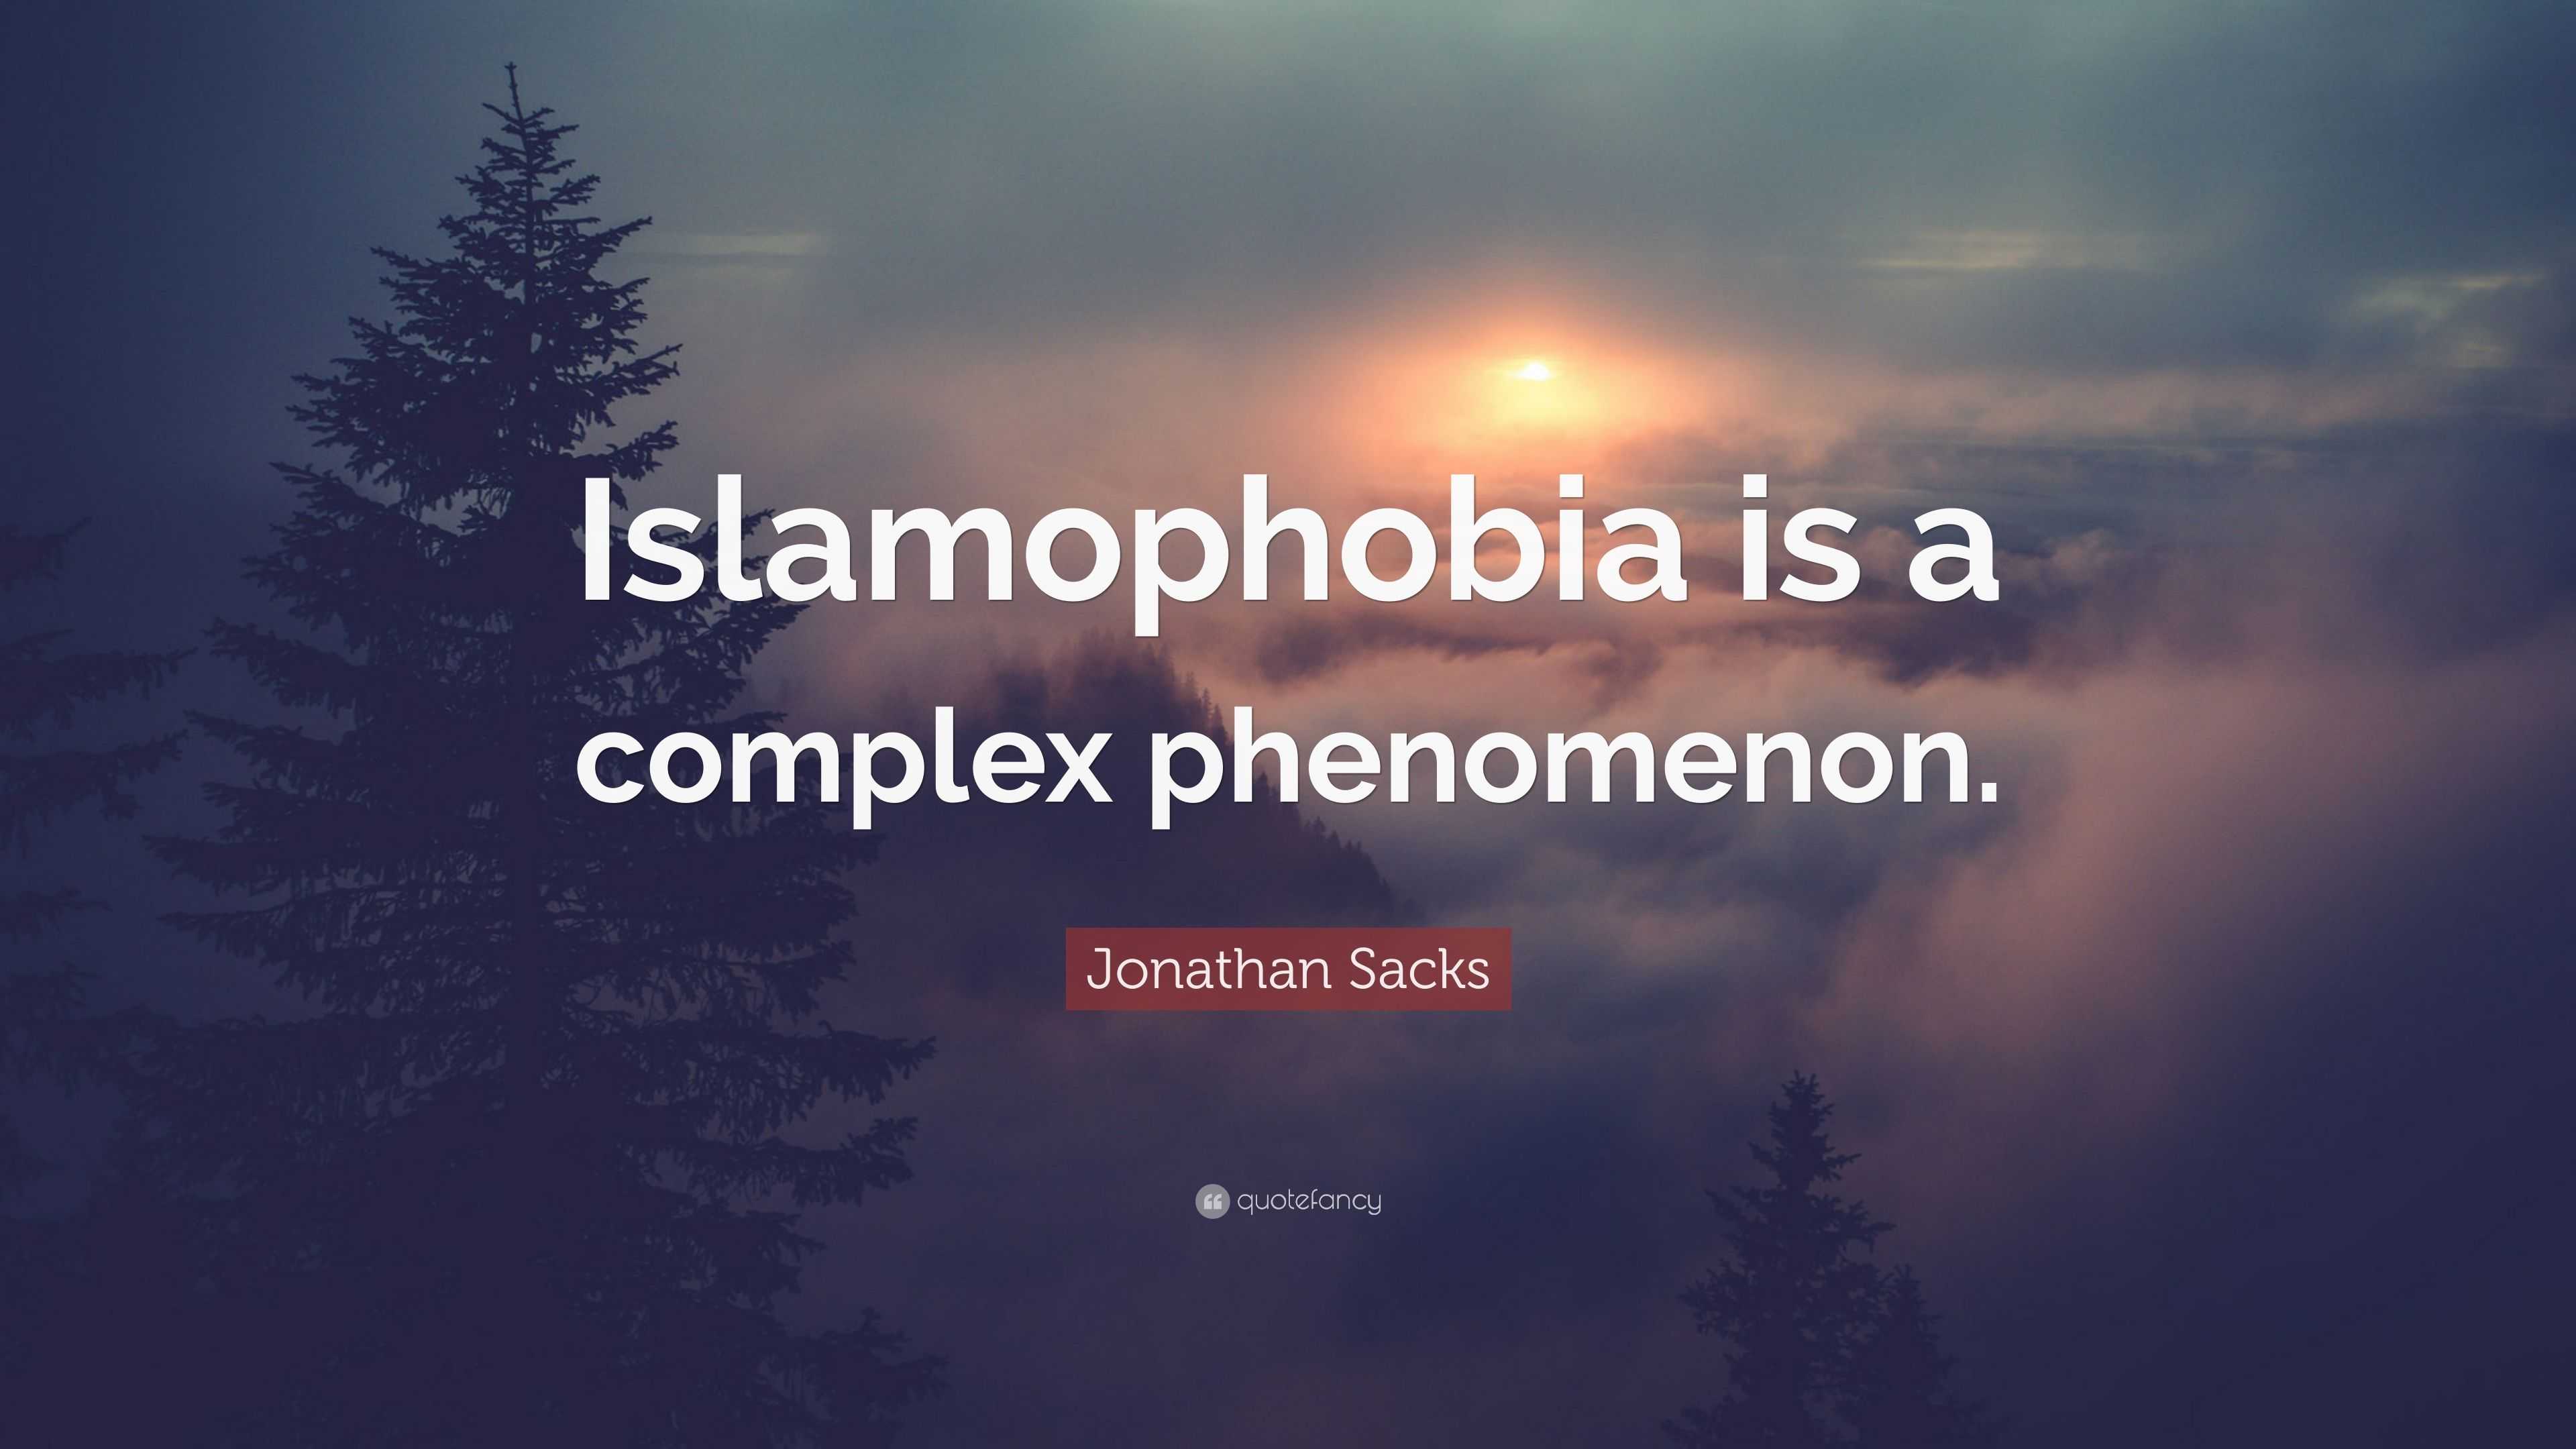 essay on islamophobia with quotations